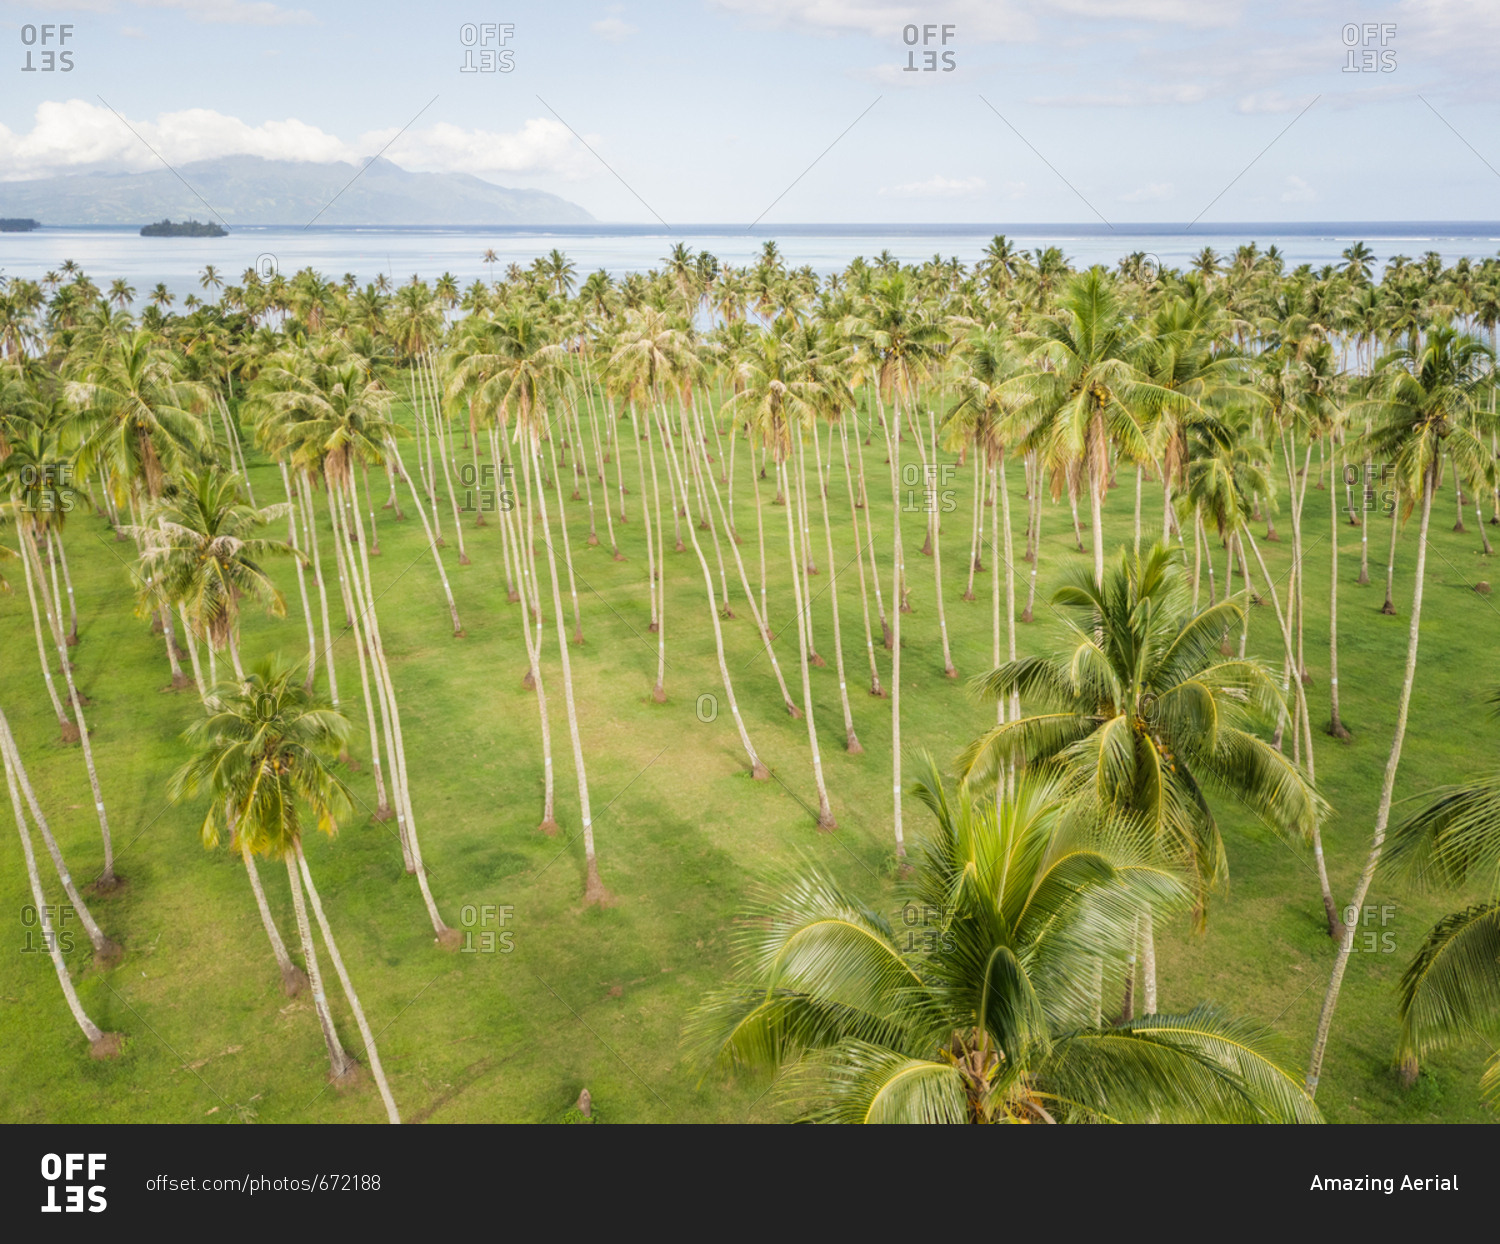 Aerial view of a forest of palm trees in Tahiti coast, French Polynesia.